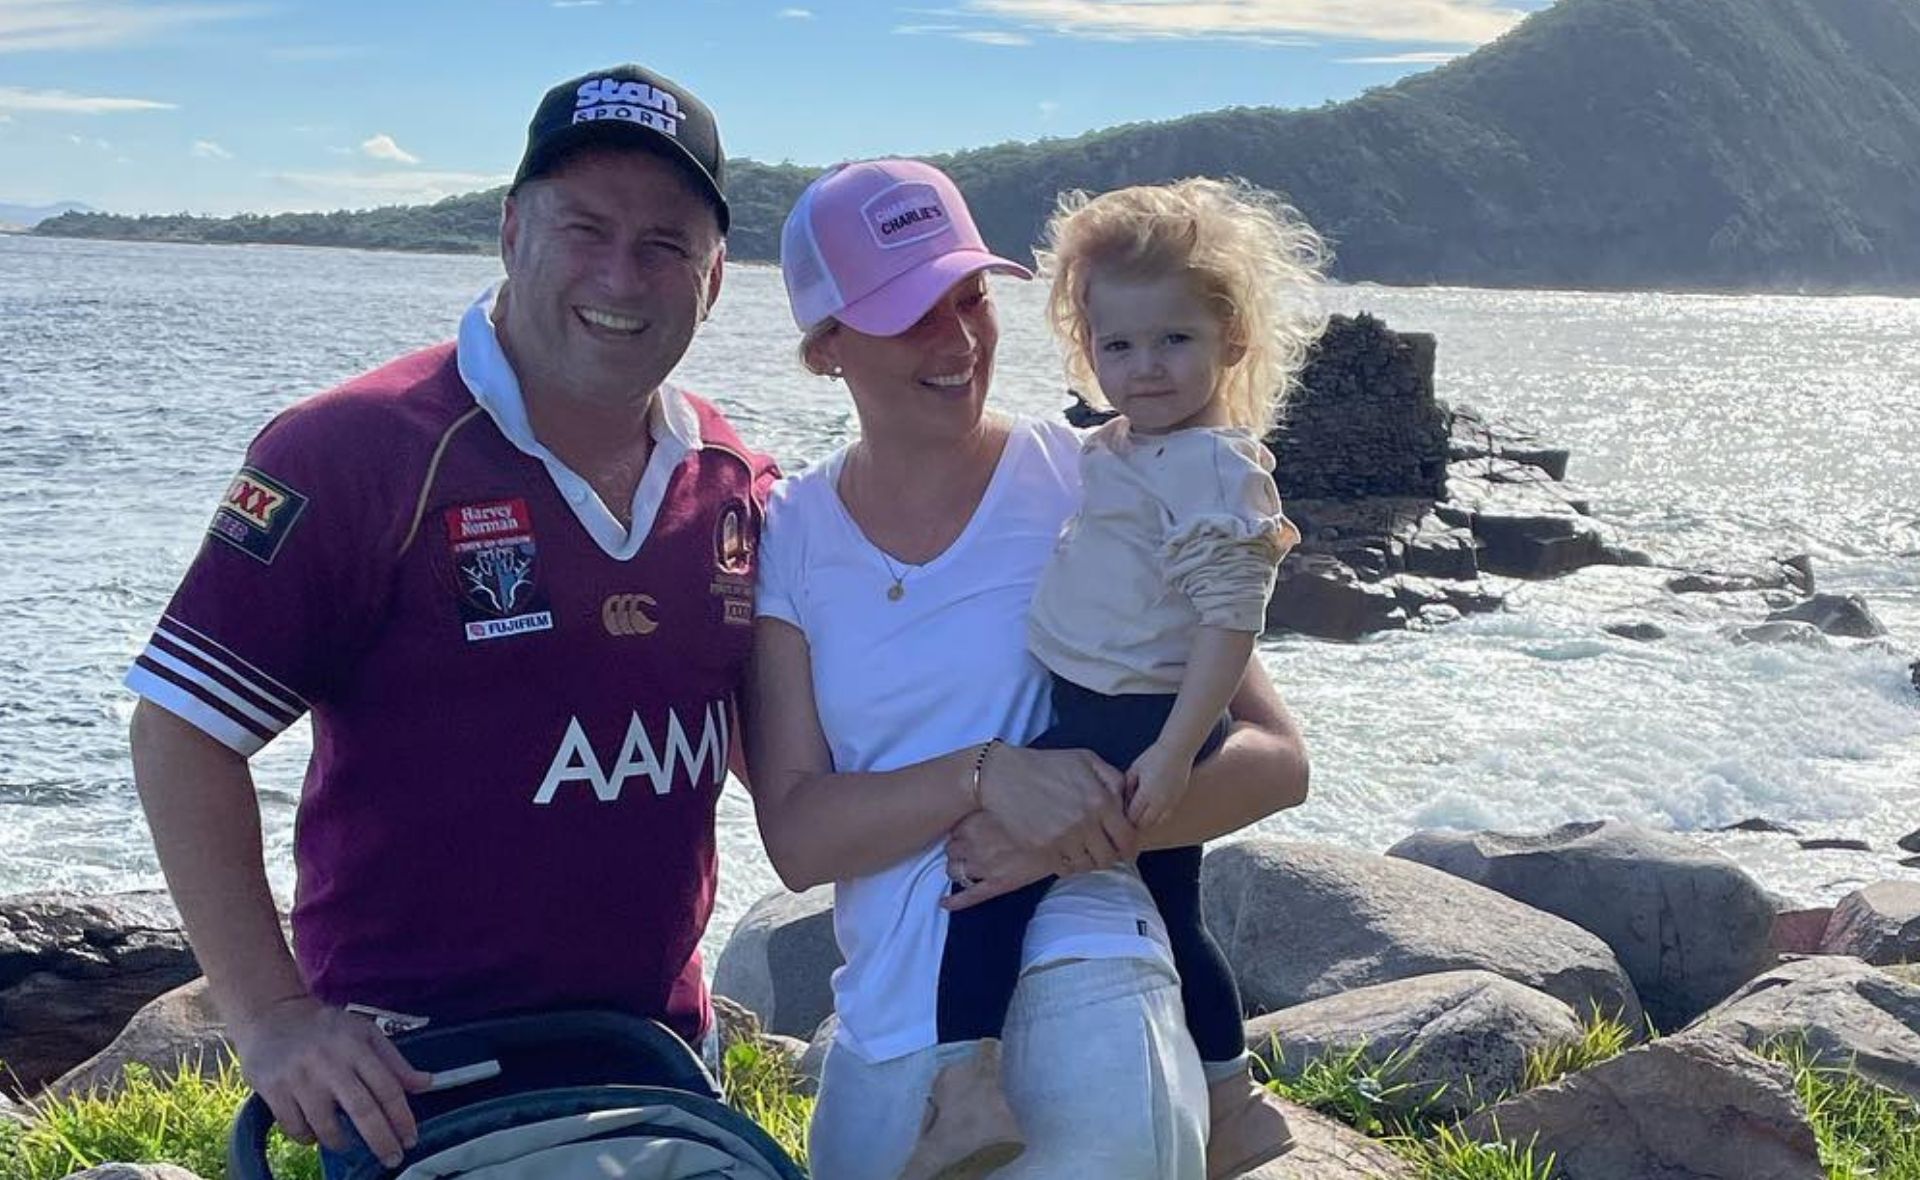 Karl and Jasmine Stefanovic celebrate their daughter Harper’s second birthday: “Our little ray of sunshine”